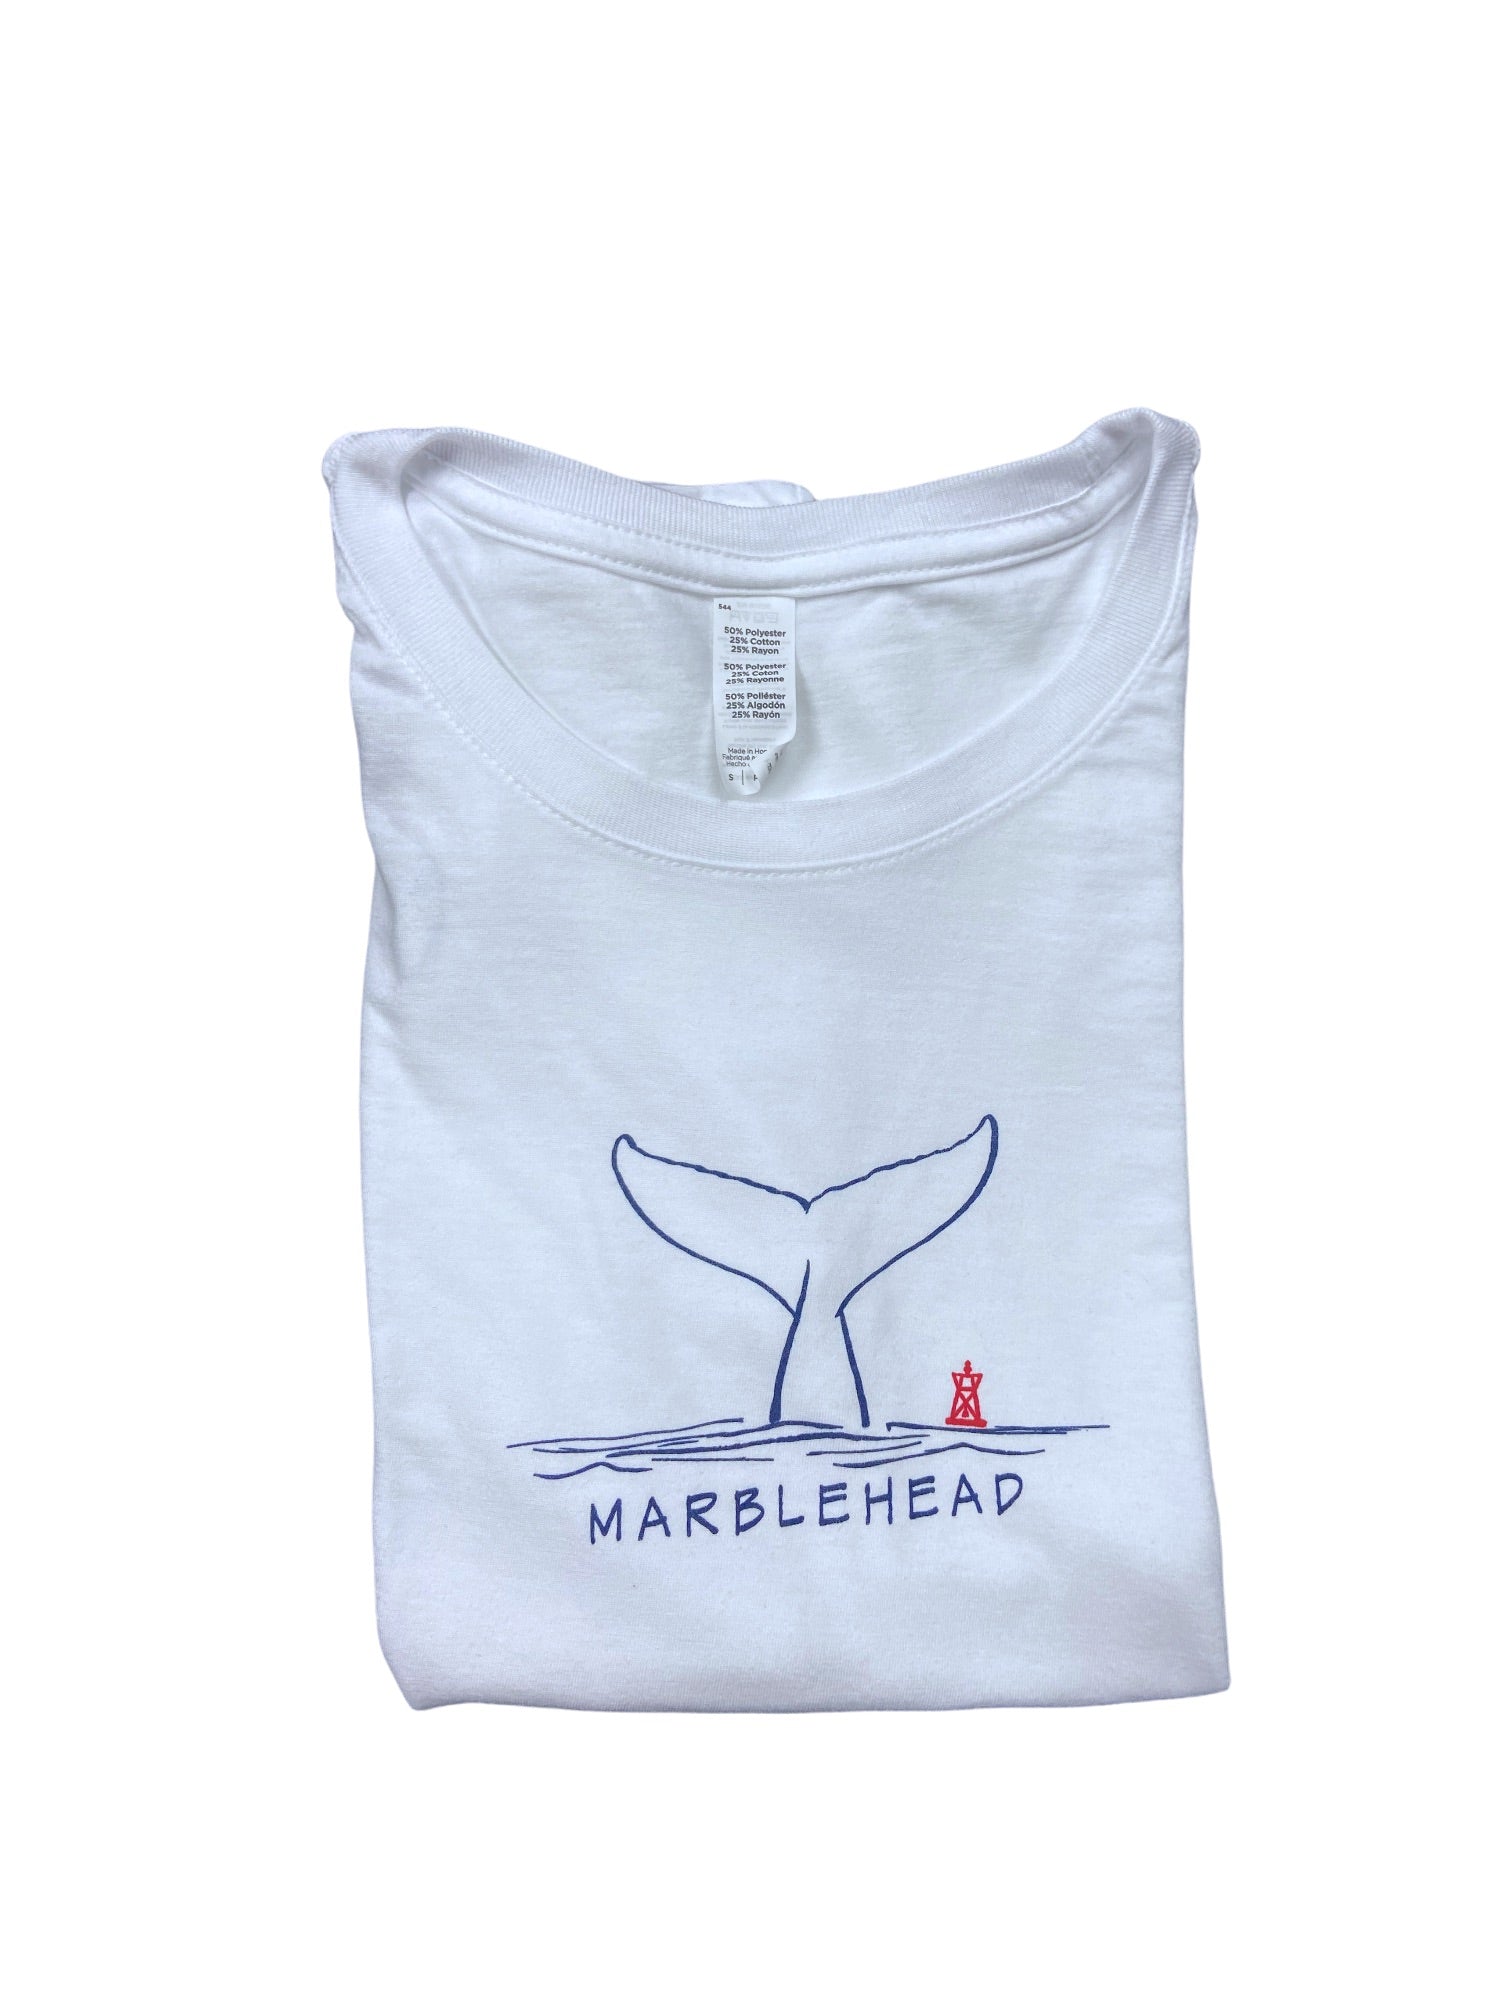 S/S Whale Tail Tee White